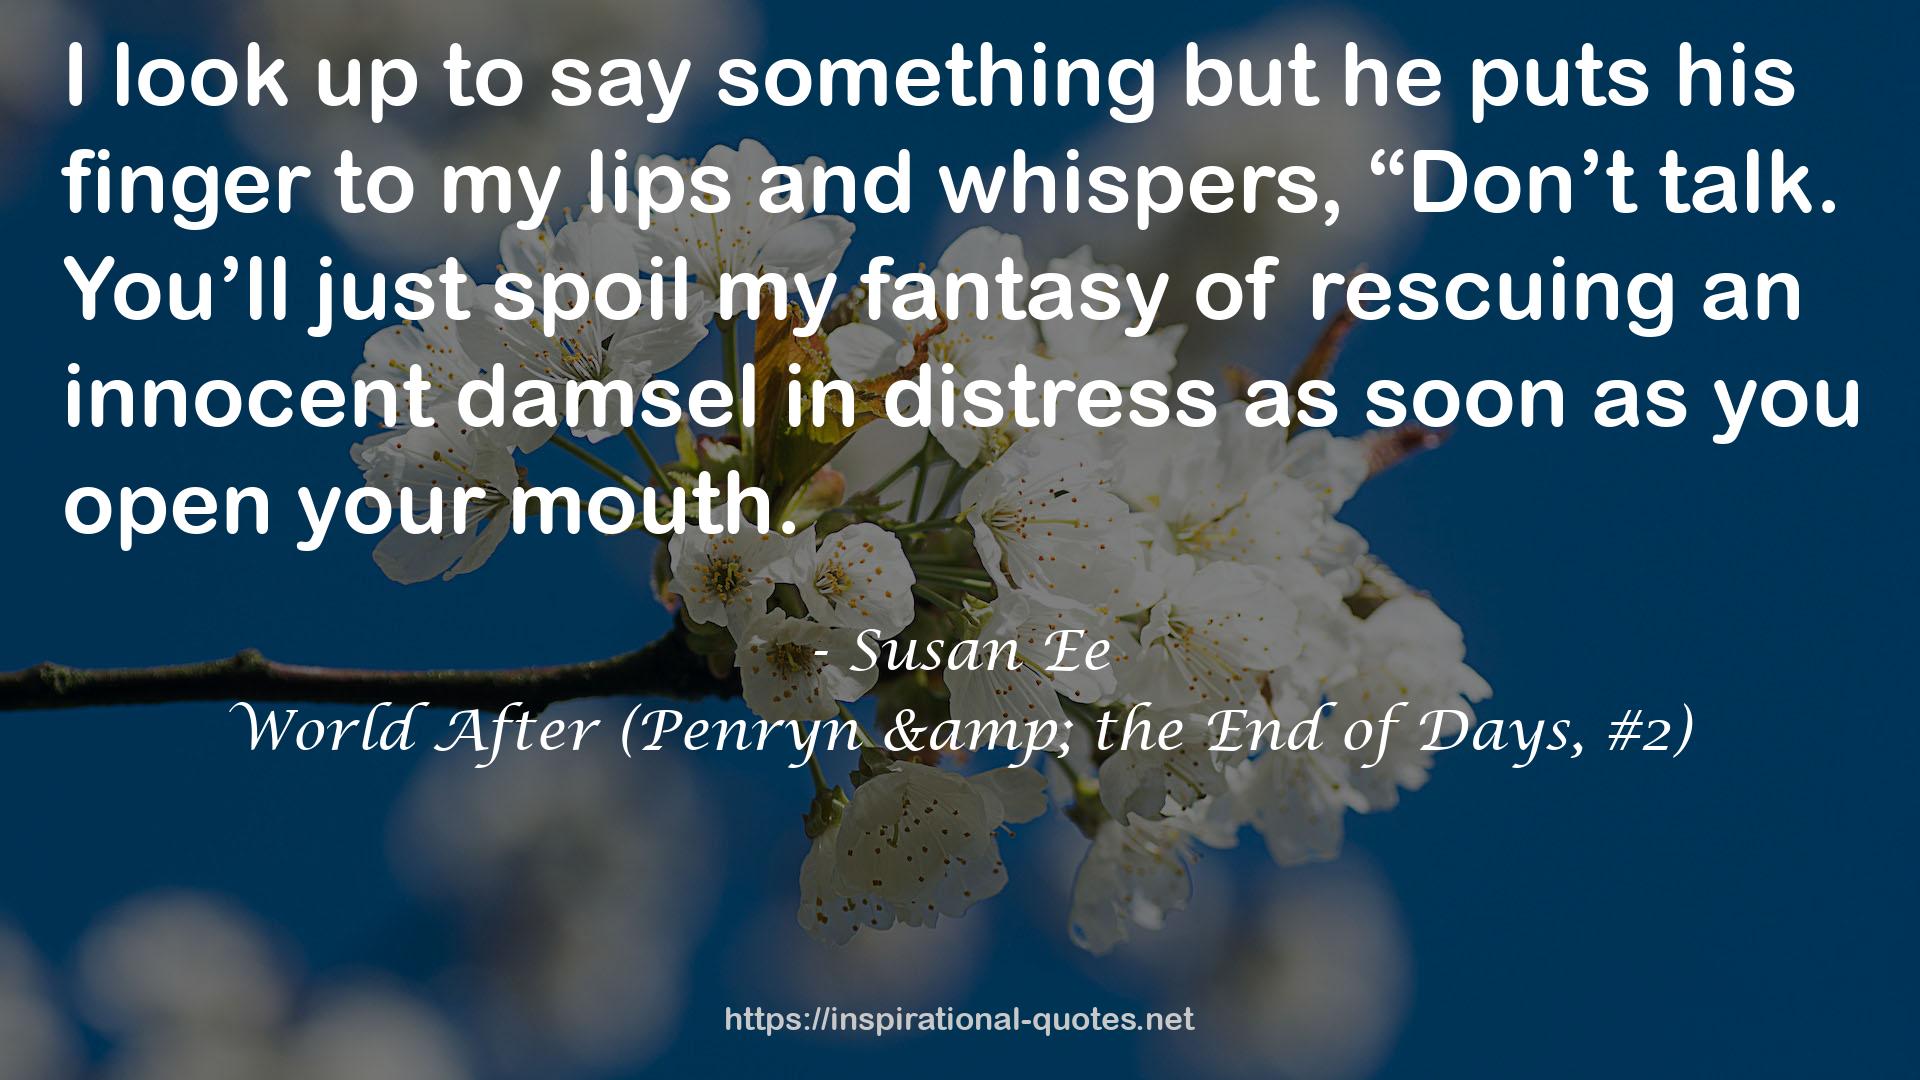 World After (Penryn & the End of Days, #2) QUOTES